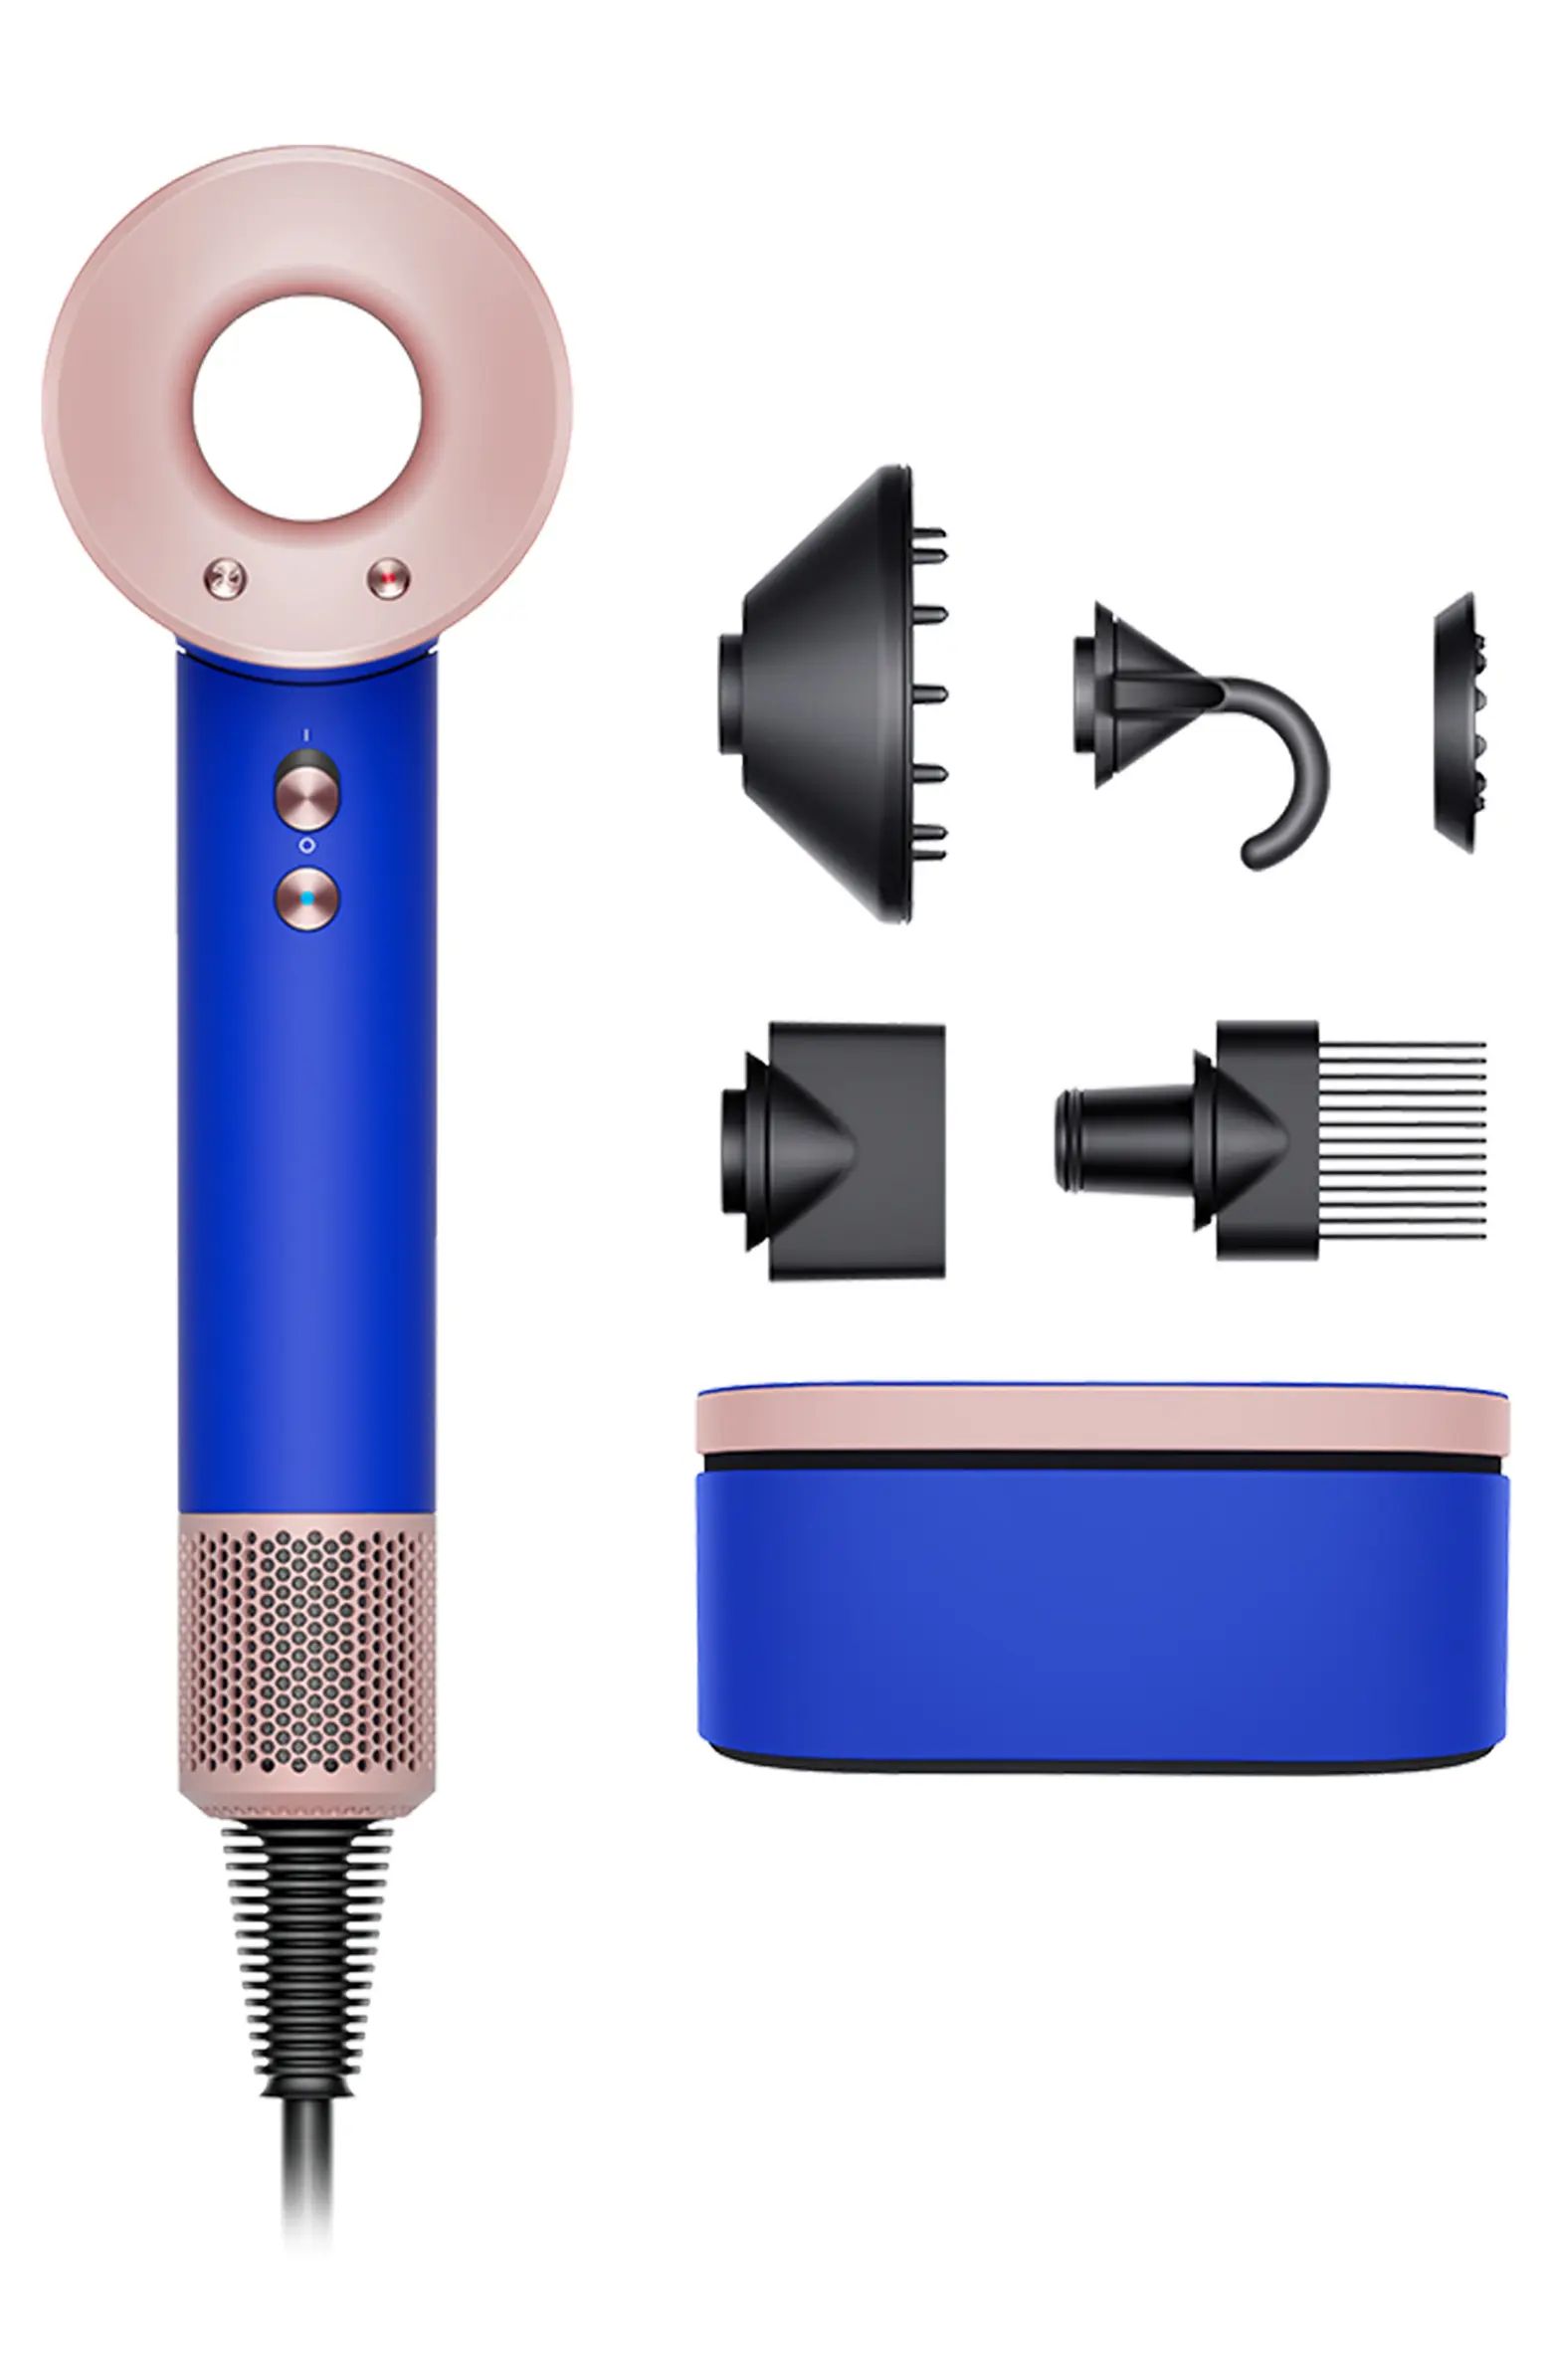 Special Edition Dyson Supersonic™ Hair Dryer in Blue Blush (Limited Edition) $490 Value | Nordstrom